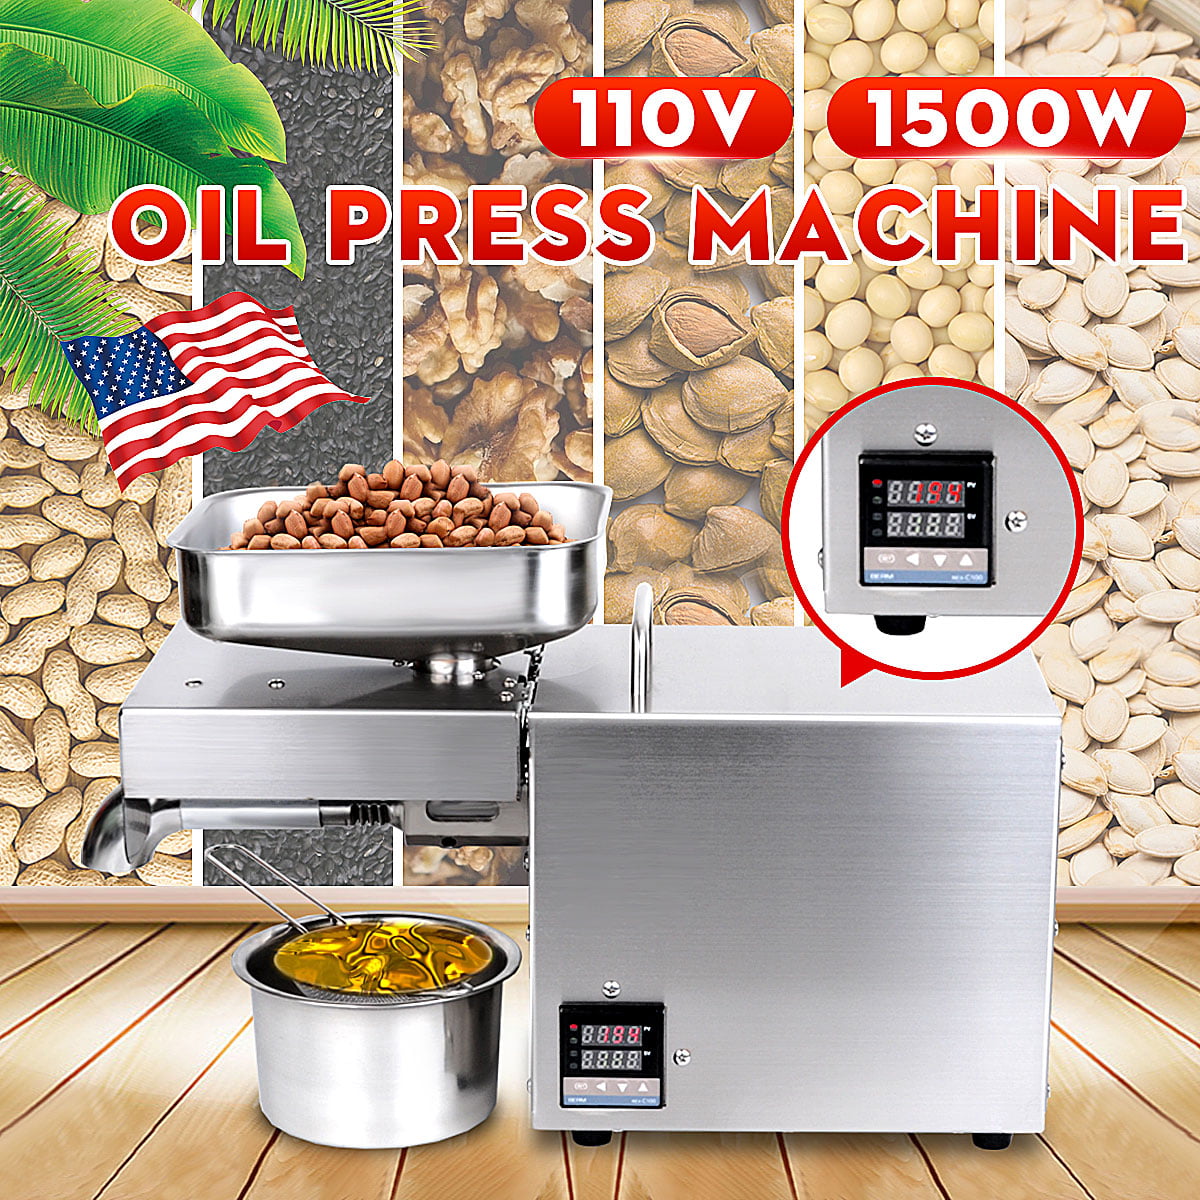 110V Automatic Oil Press Machine Oil Extraction Extractor Expeller Commerical